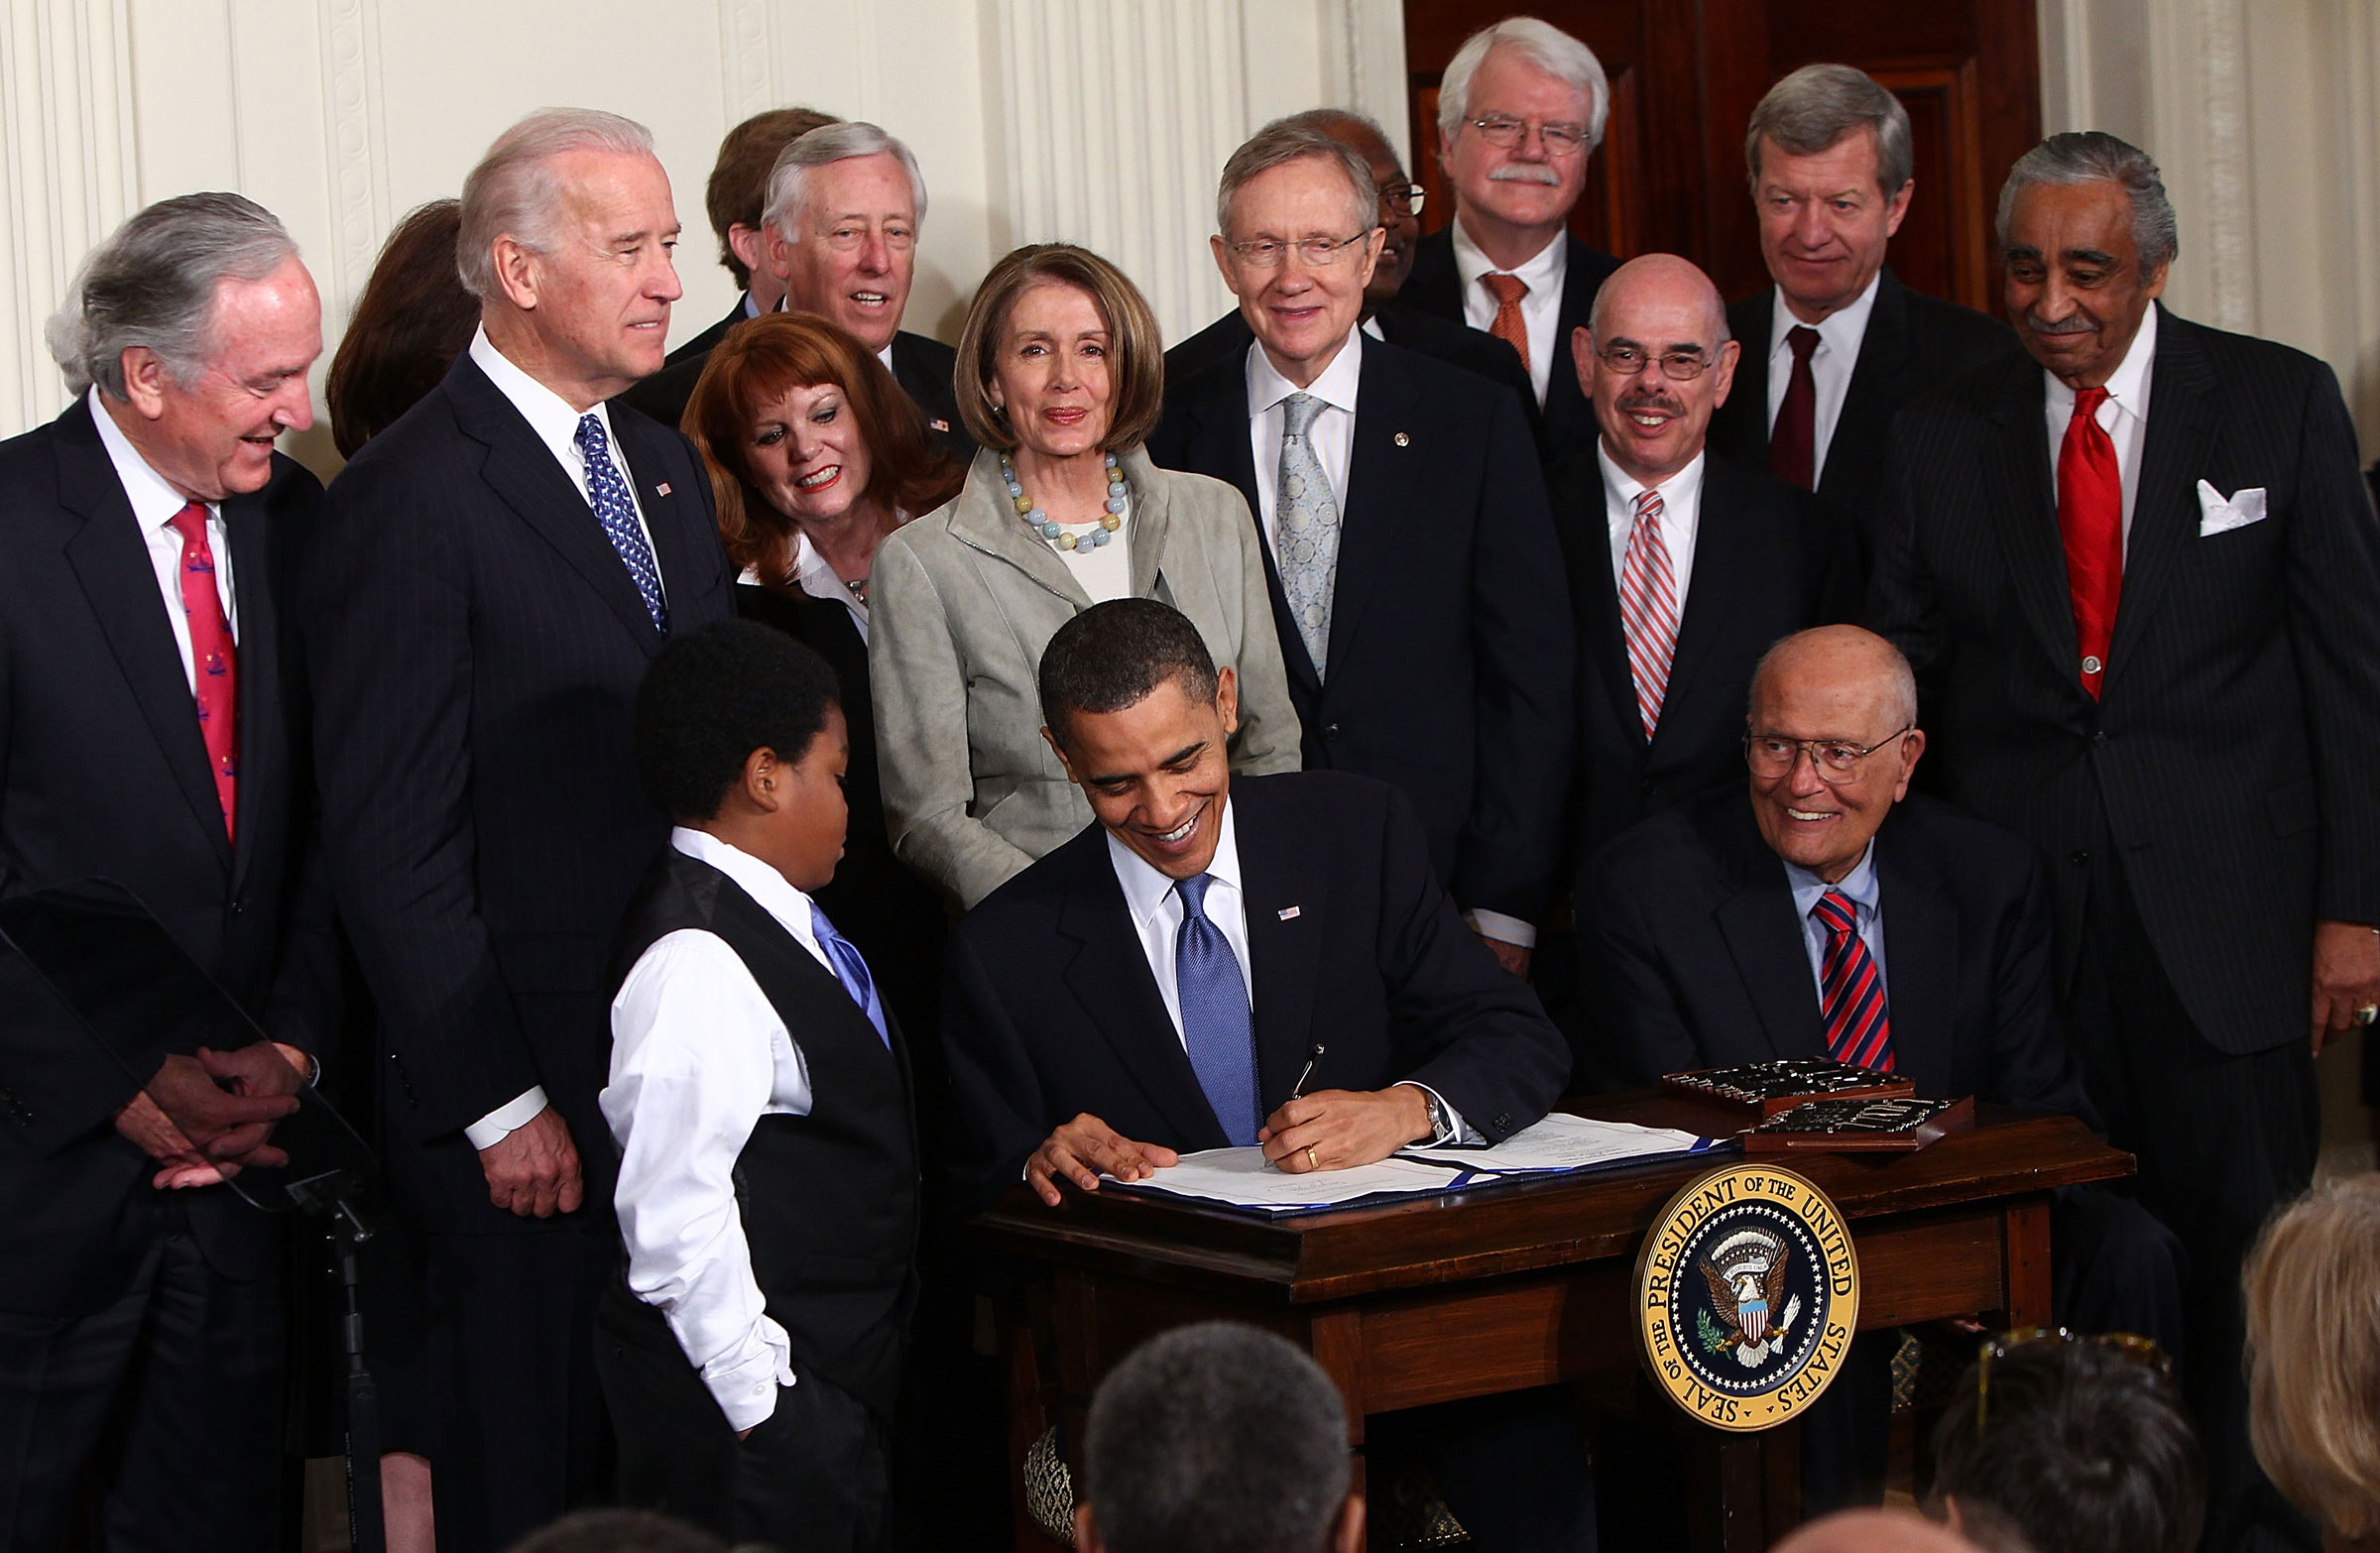 House Speaker Nancy Pelosi stands behind President Barack Obama as he signs the Affordable Care Act for America during a ceremony with fellow Democrats in the East Room of the White House on March 23, 2010. (Win McNamee—Getty Images)